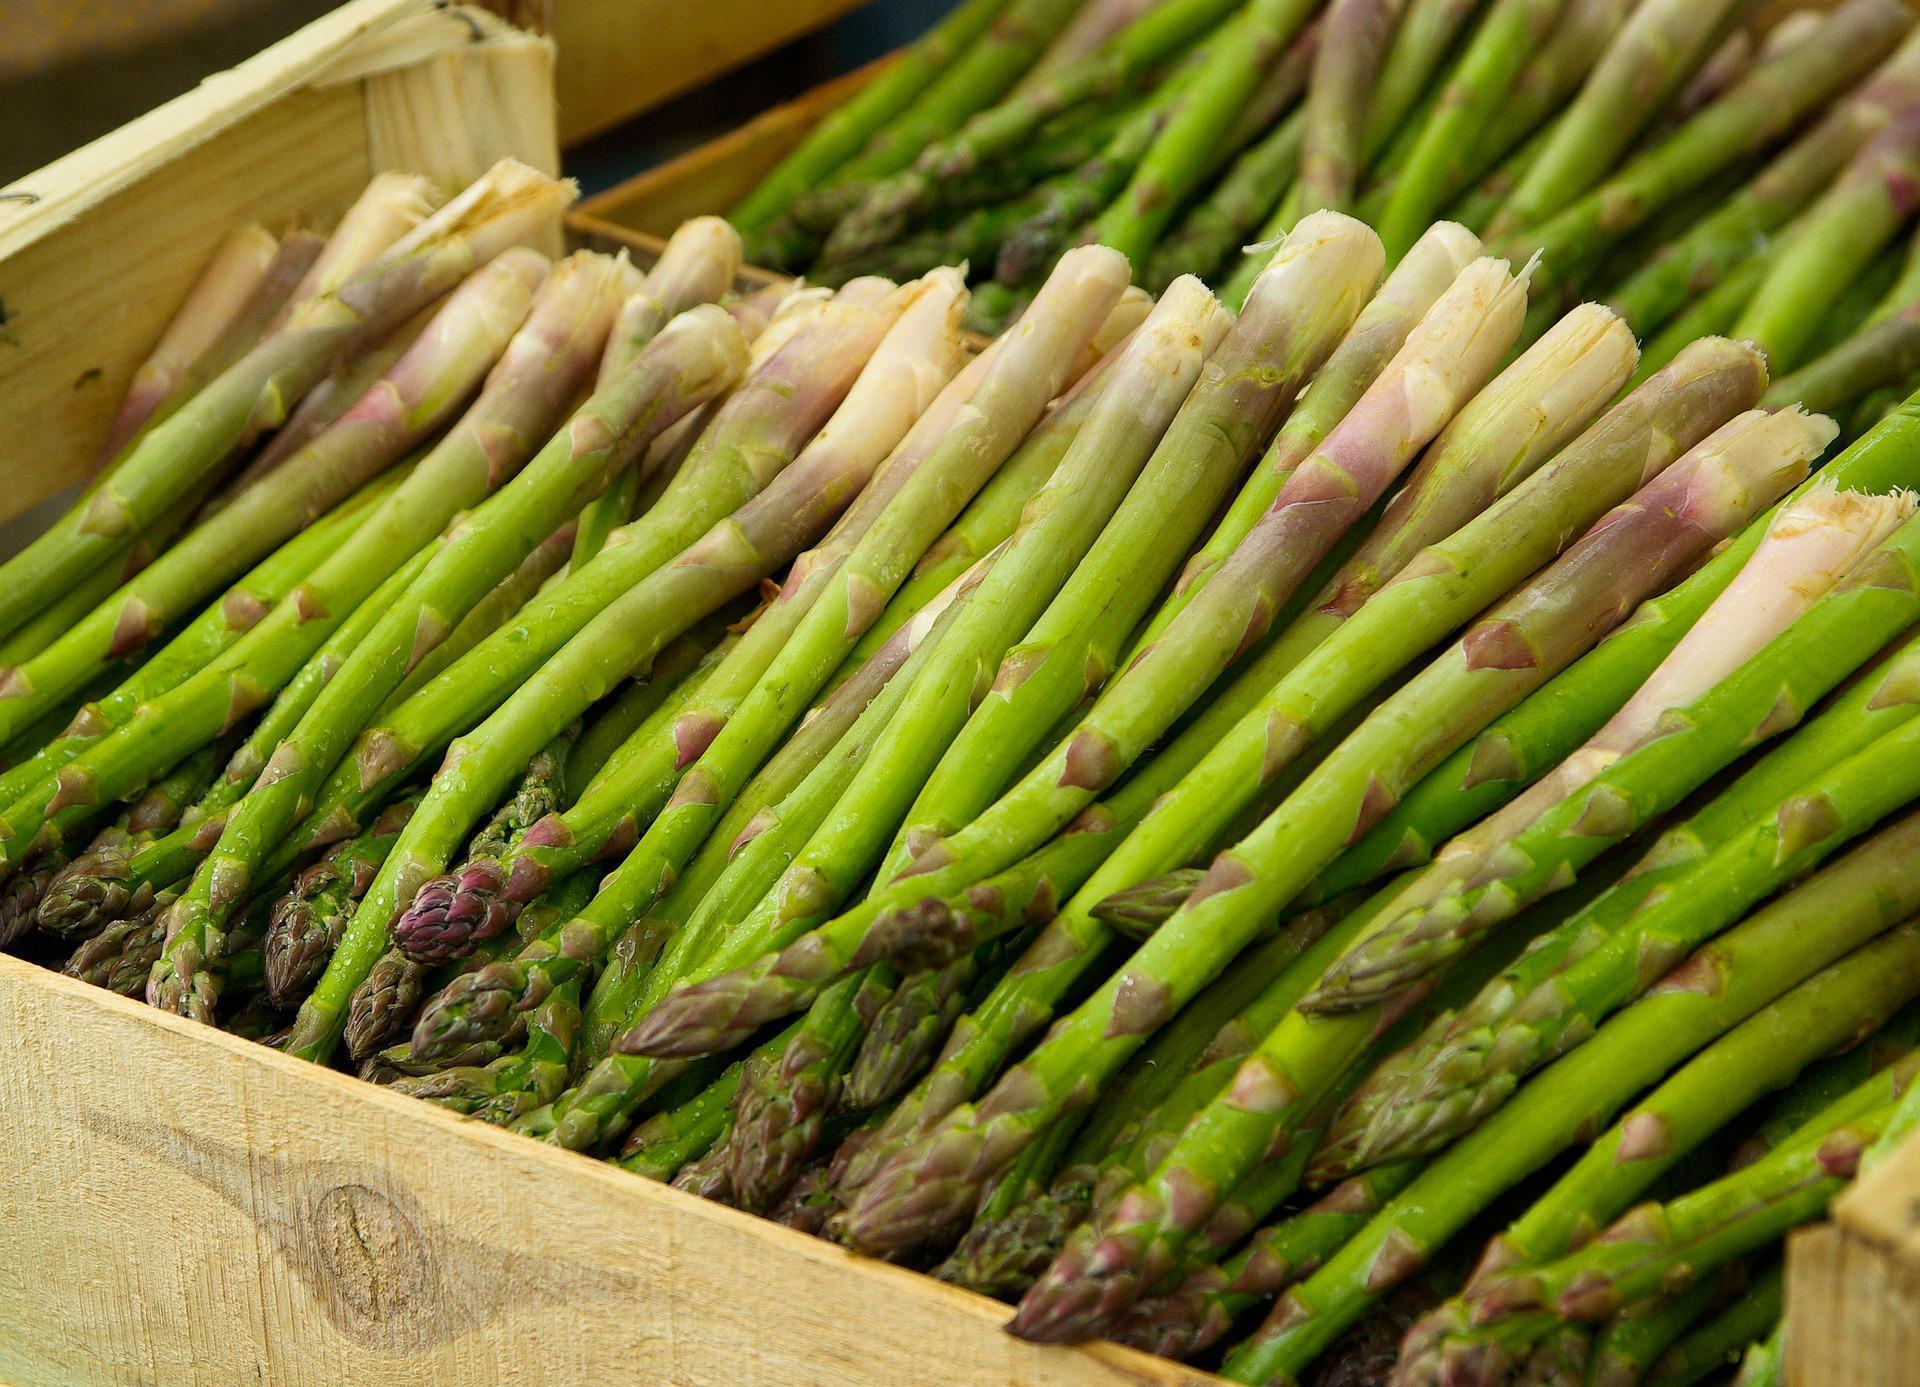 What to cook with asparagus